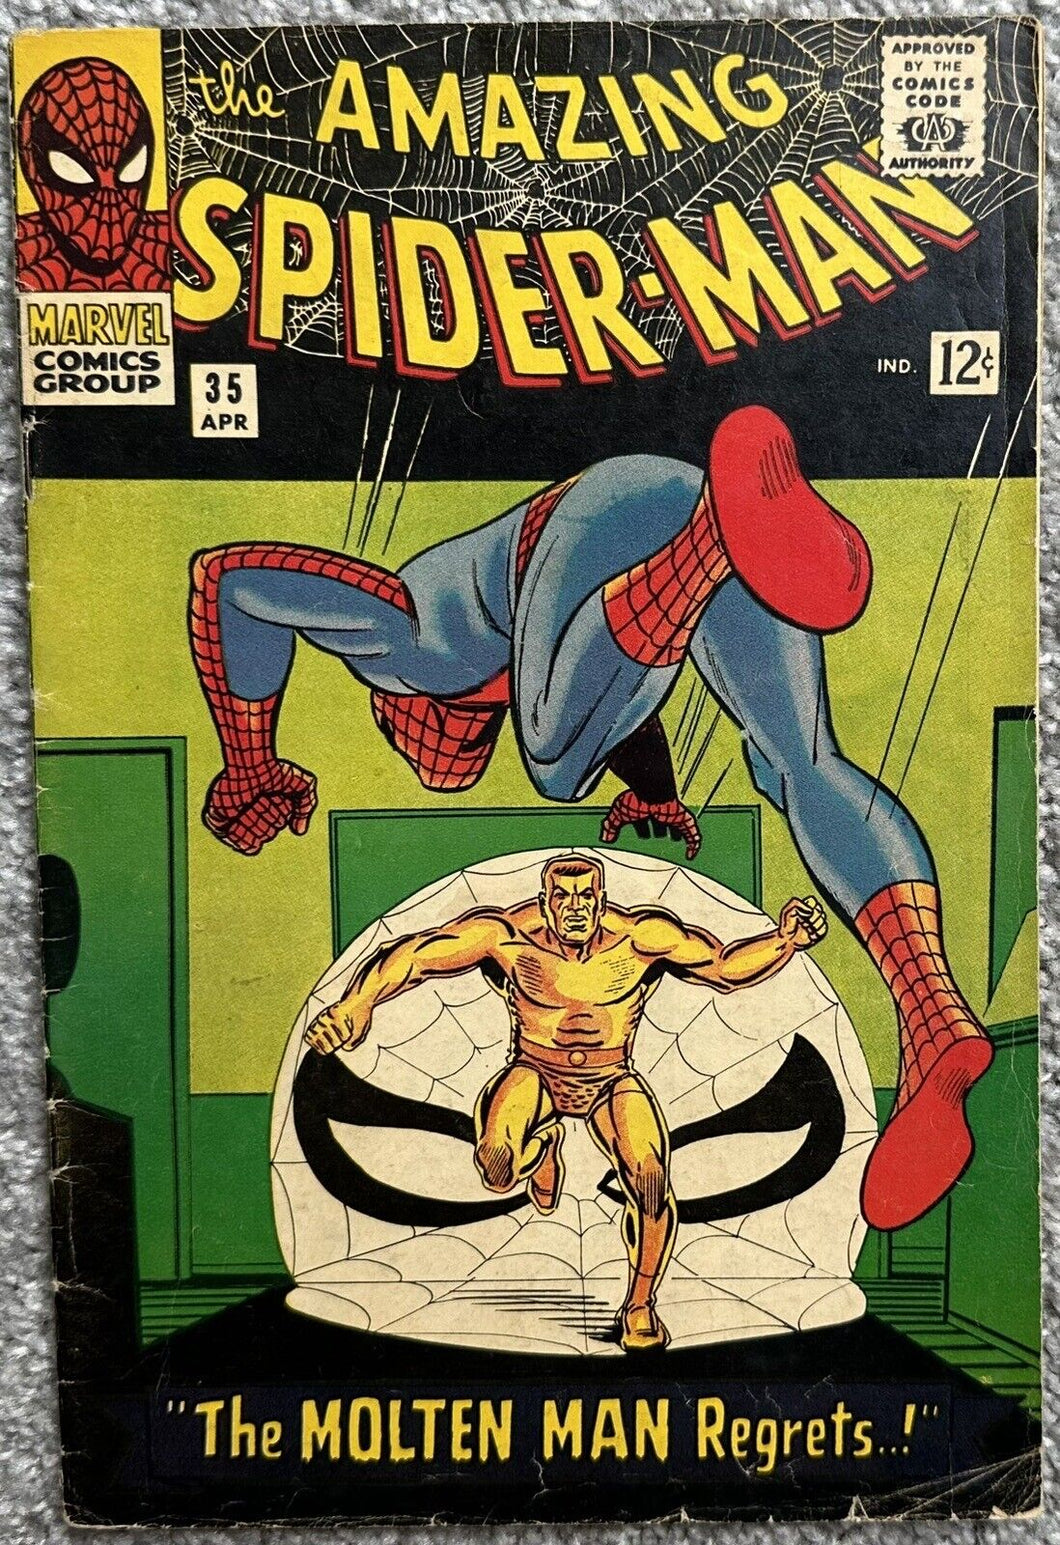 THE AMAZING SPIDER-MAN #35 (MARVEL,1966)  2nd appearance of the Molten Man.